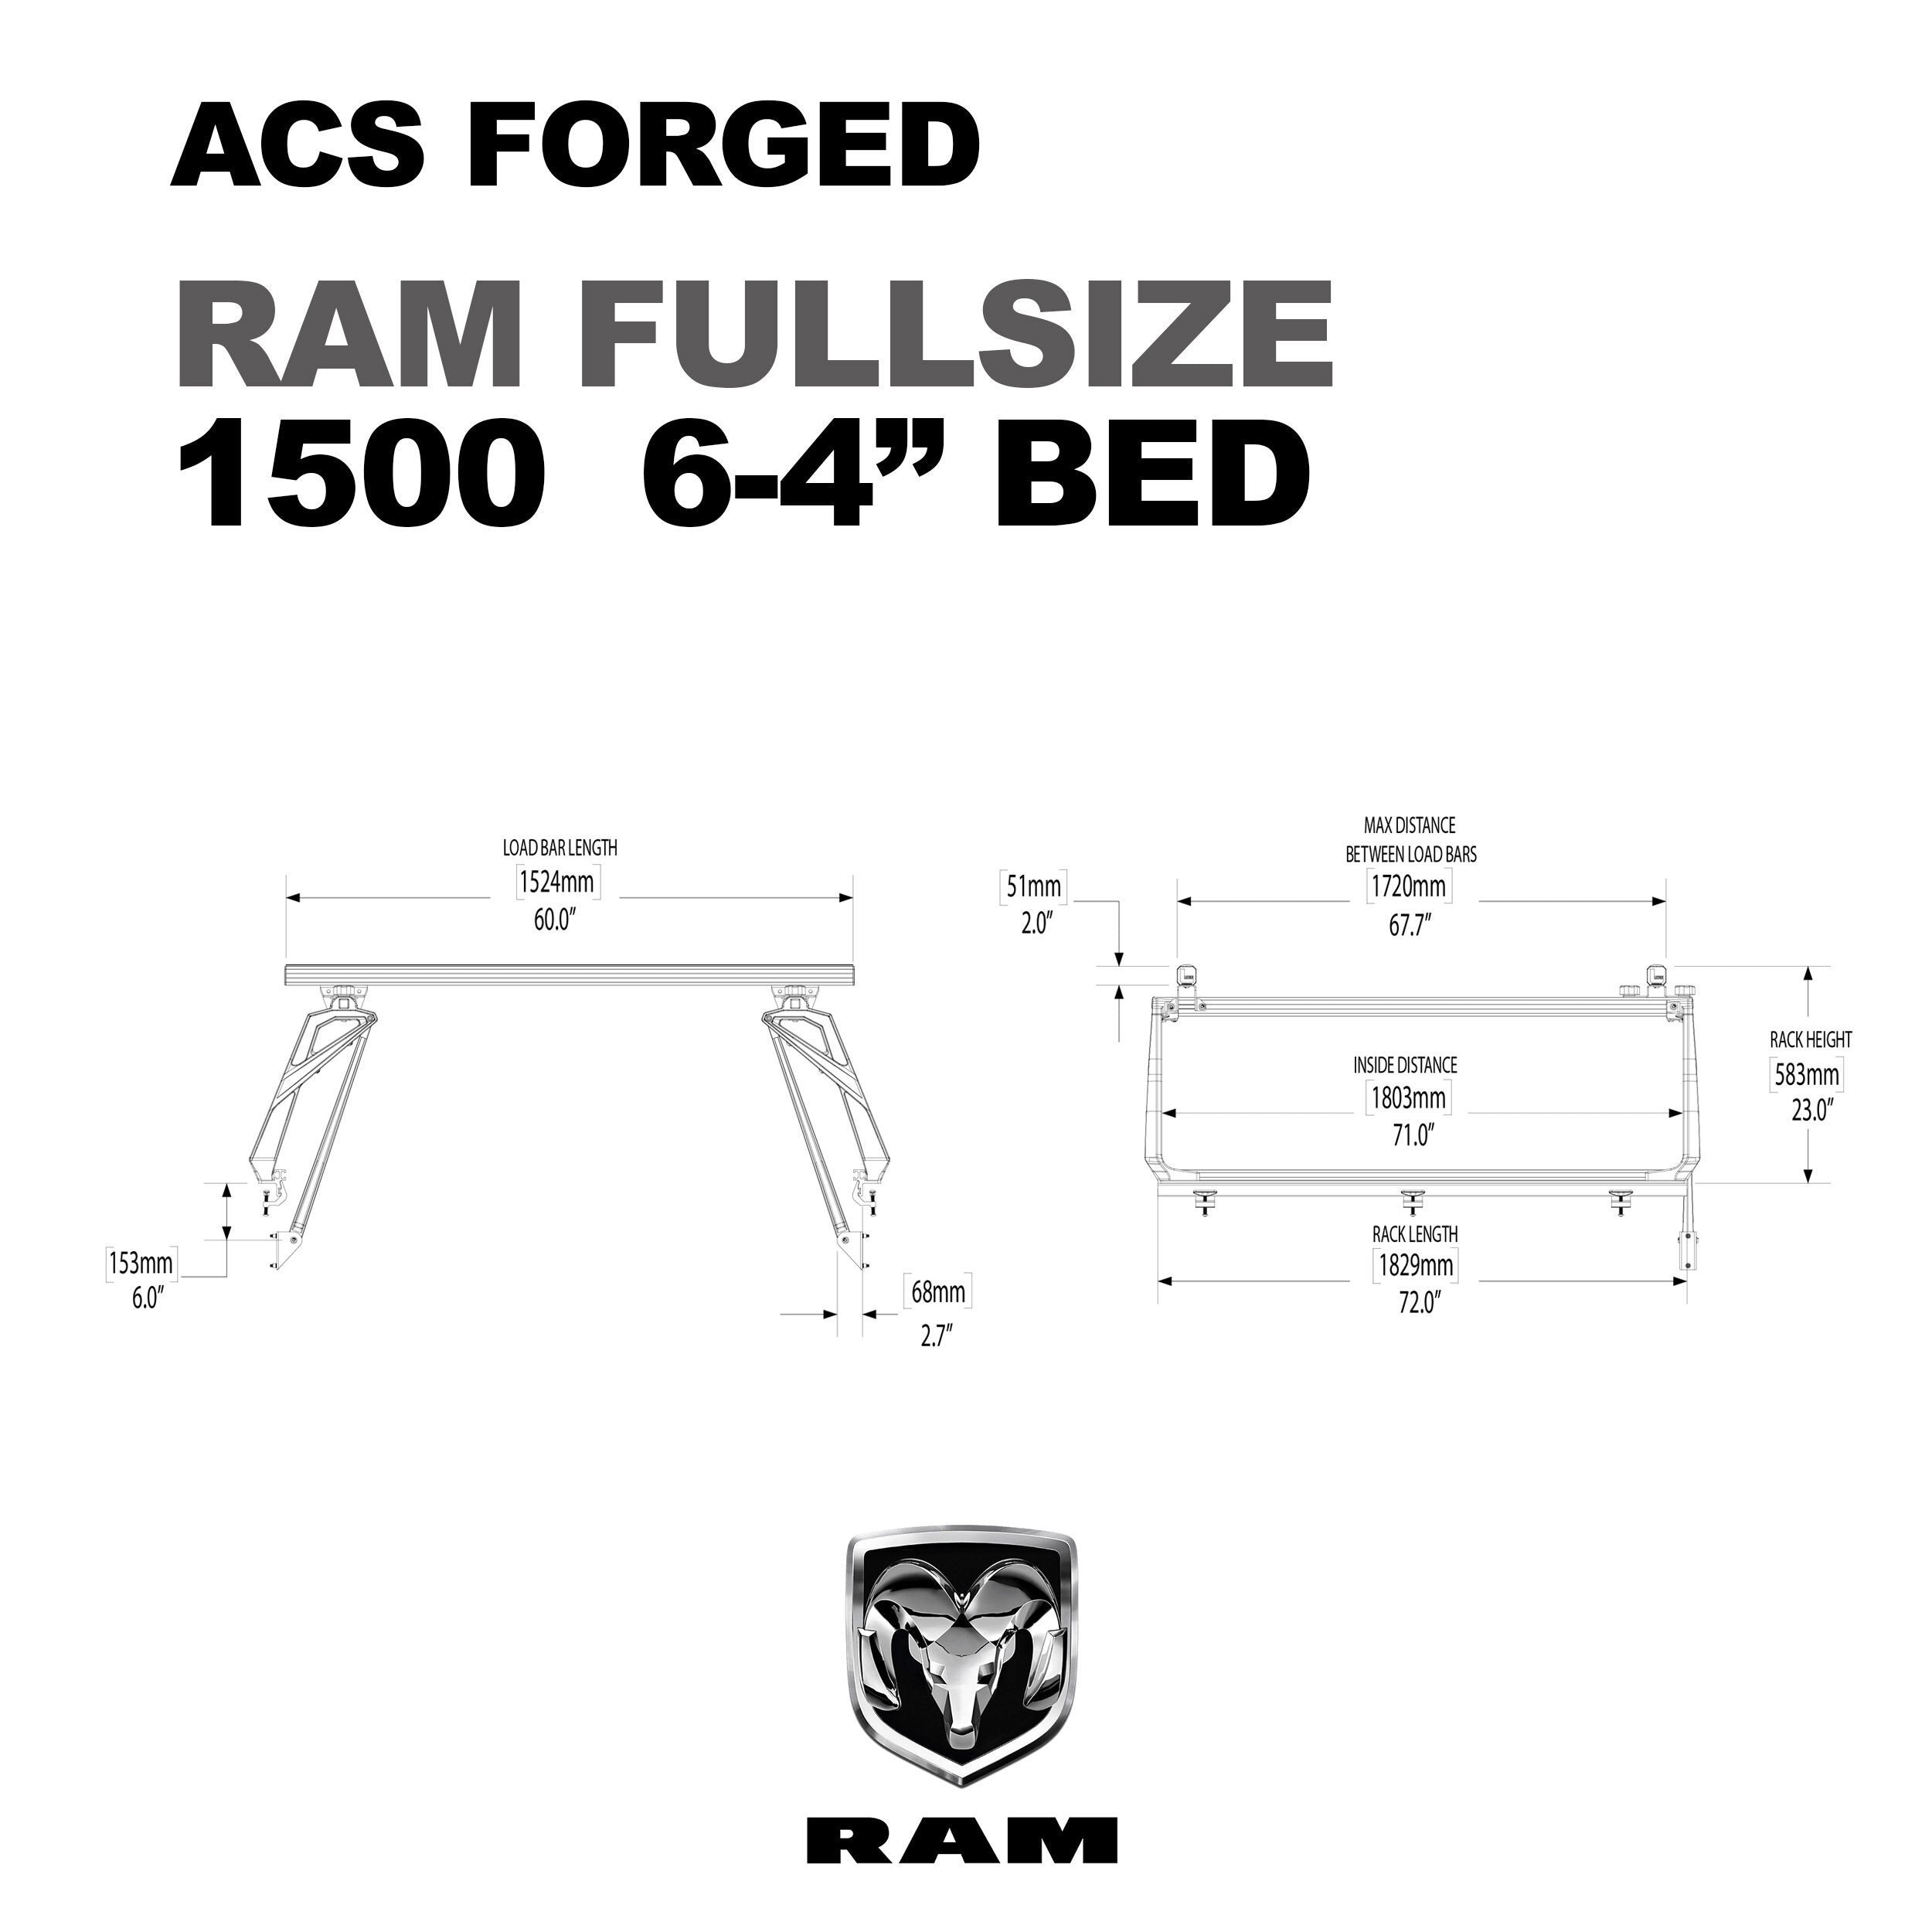 '09-19 Dodge Ram 1500-ACS Forged Bed Accessories Leitner Designs design